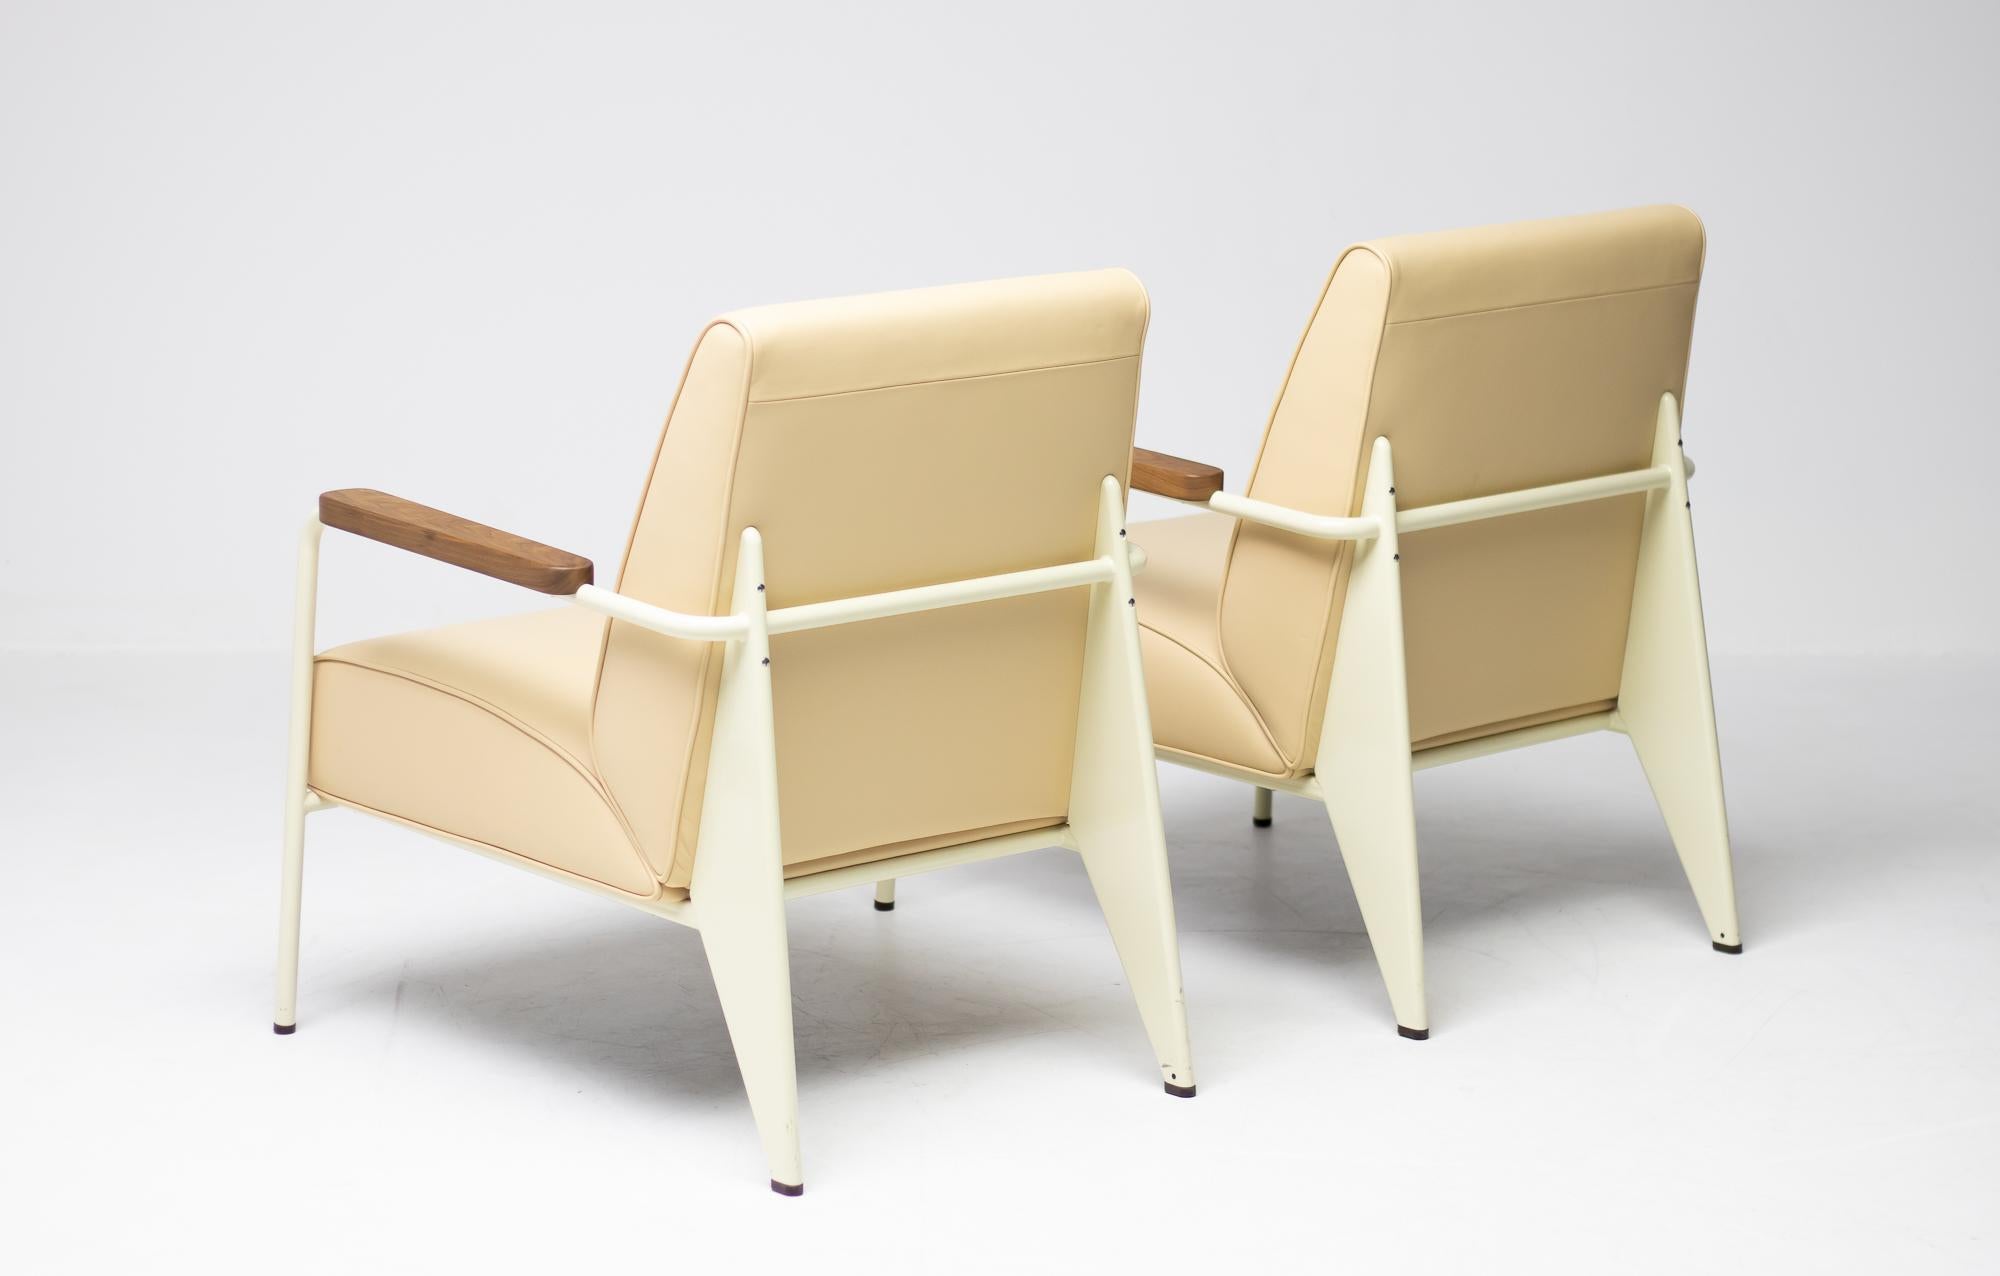 Limited edition Fauteuil de Salon, designed by Jean Prouvé in 1939.
Made by Vitra in 2018, in beautiful cream leather with very light lime frame and walnut armrests. 
The chairs where never used but only exhibited in a museum setting.
Marked with